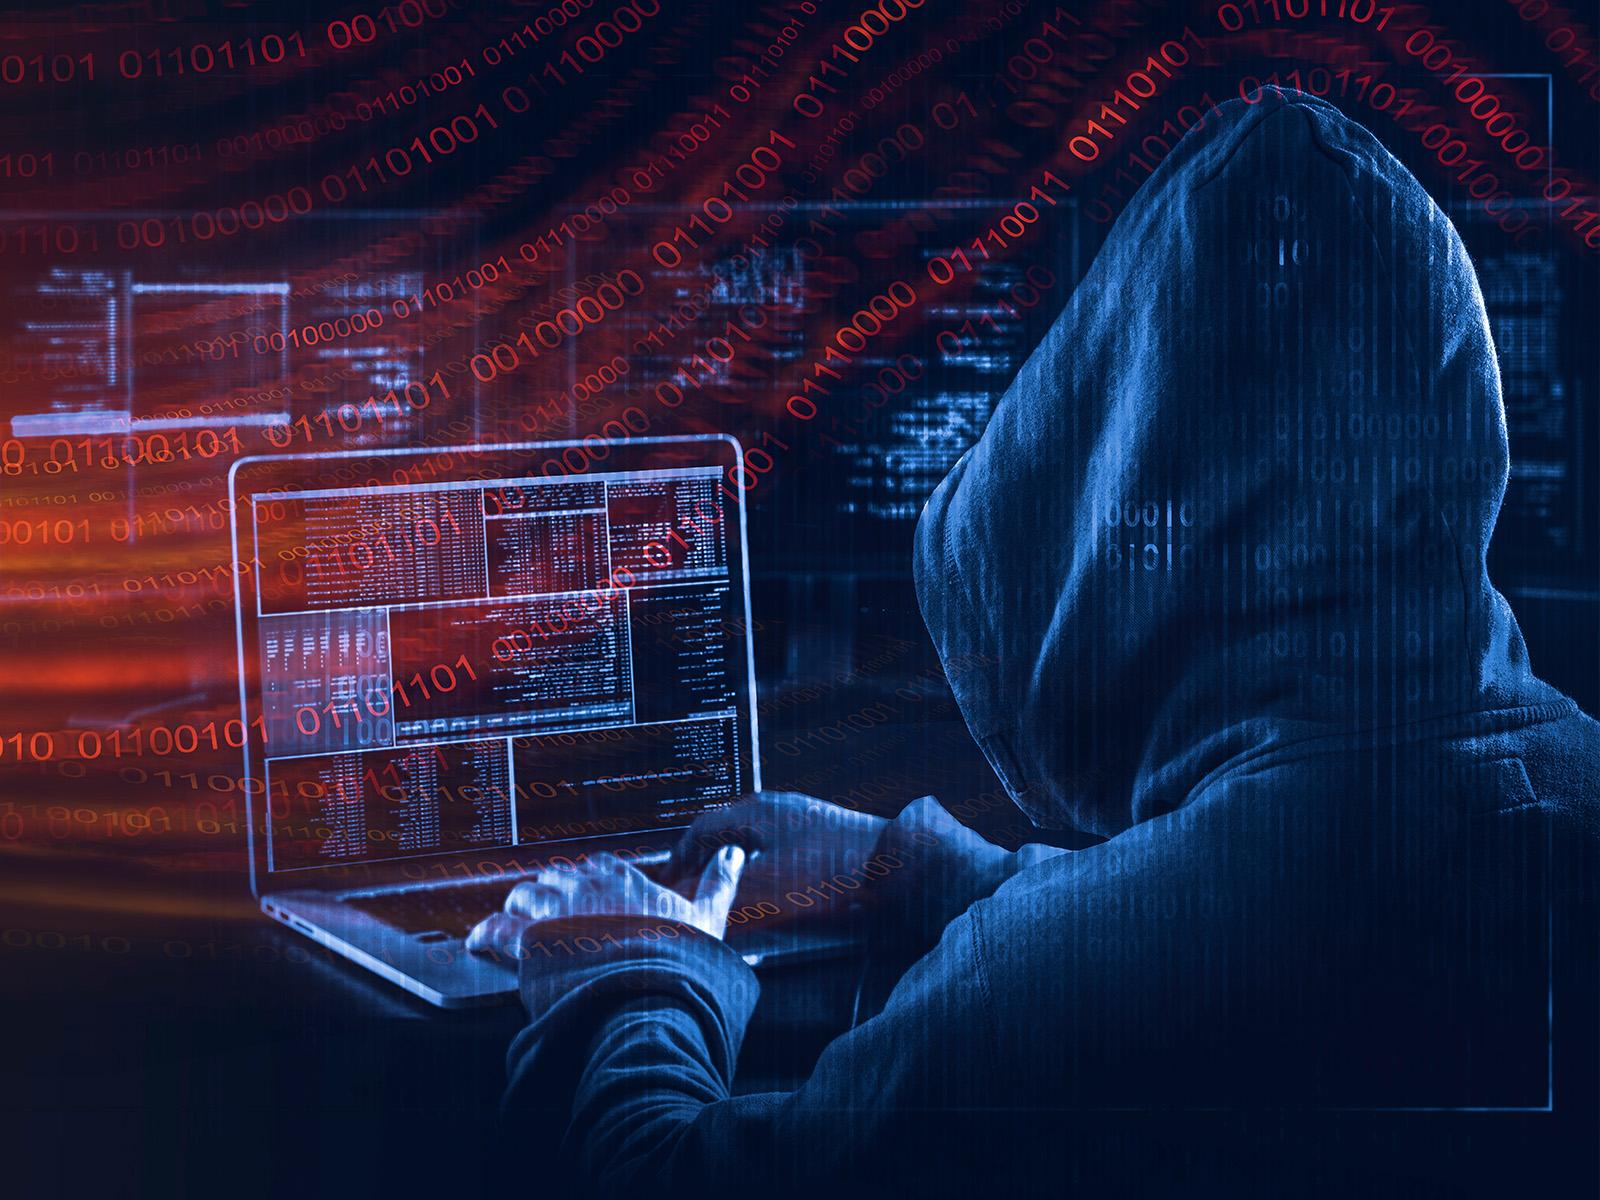 Shadow Figment decoys sidetrack hackers, buying time for the good guys managing control systems and critical infrastructure. (Image by Ozrimoz | Shutterstock.com)